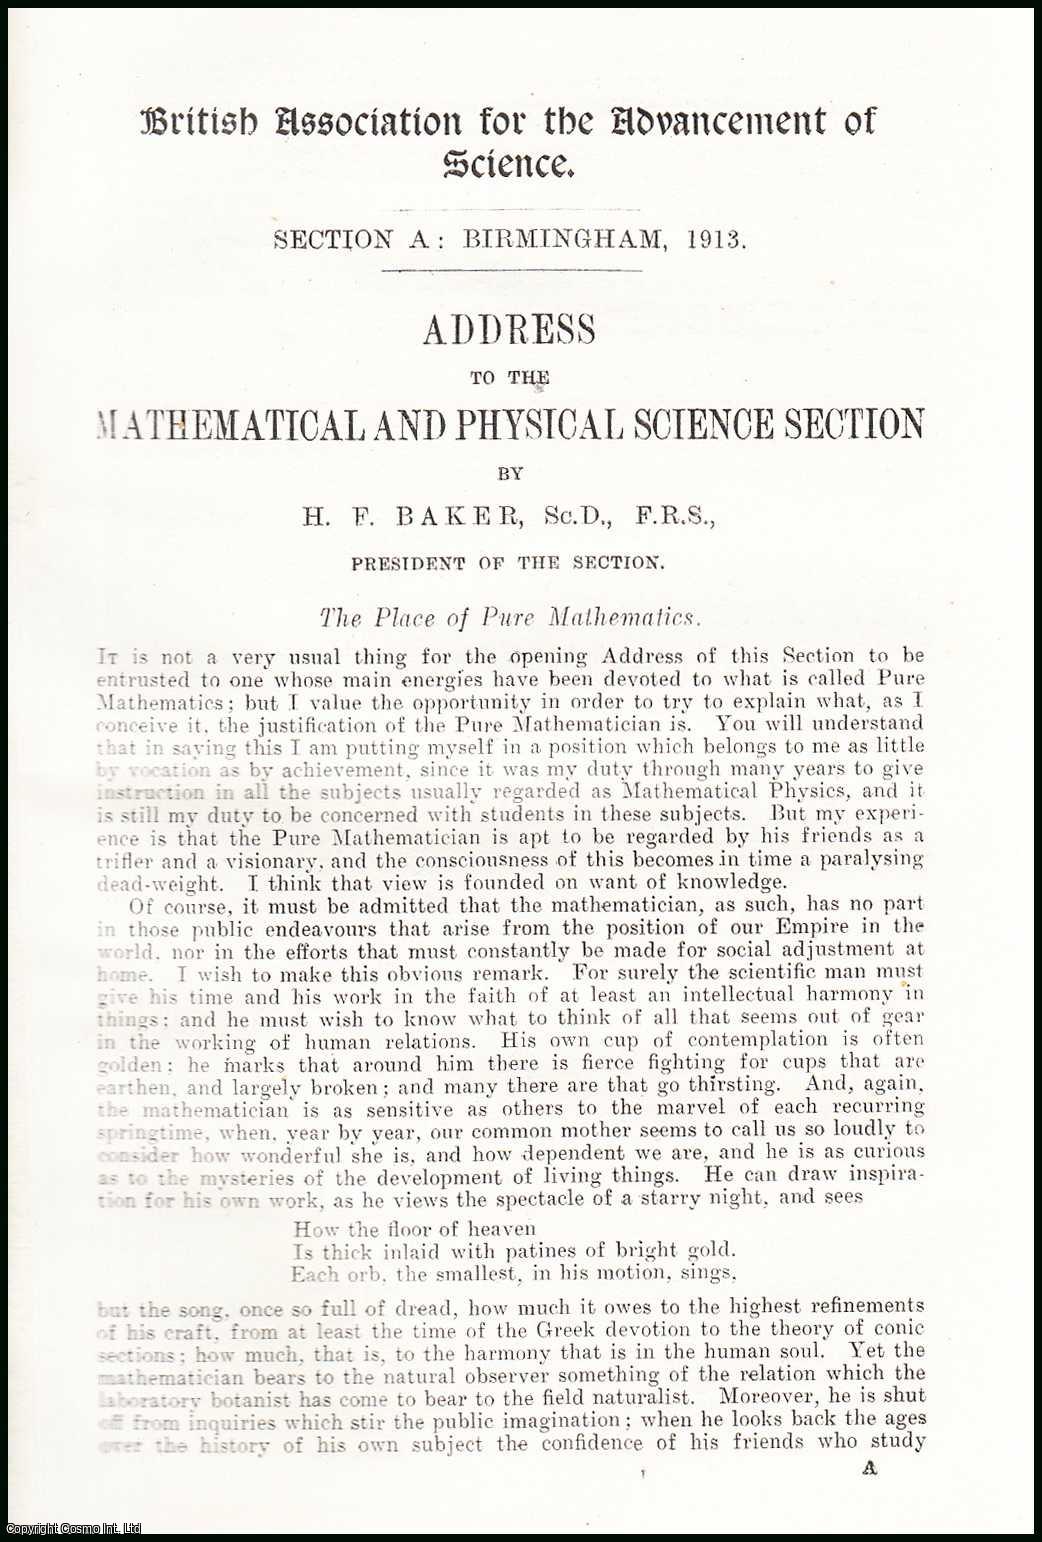 H.F. Baker, Sc.D., F.R.S. - H.F. Baker, Presidential Address, 1913 to the British Association, Meeting at Birmingham. An uncommon original article from The British Association for The Advancement of Science report, 1913.